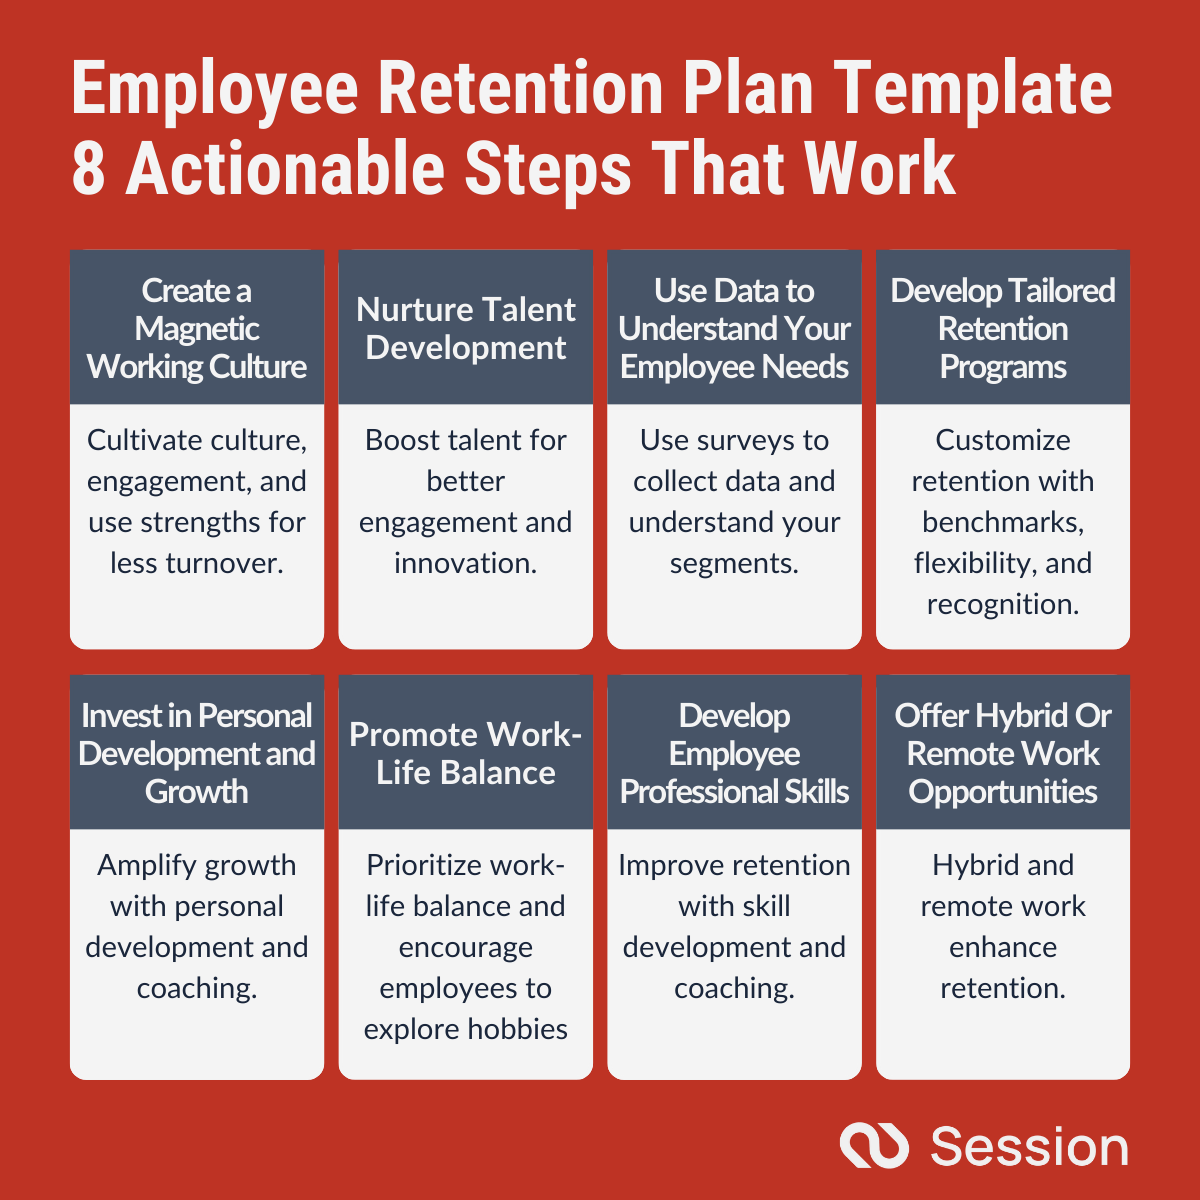 Template with 8 Actionable Steps to Improve Employee retention.